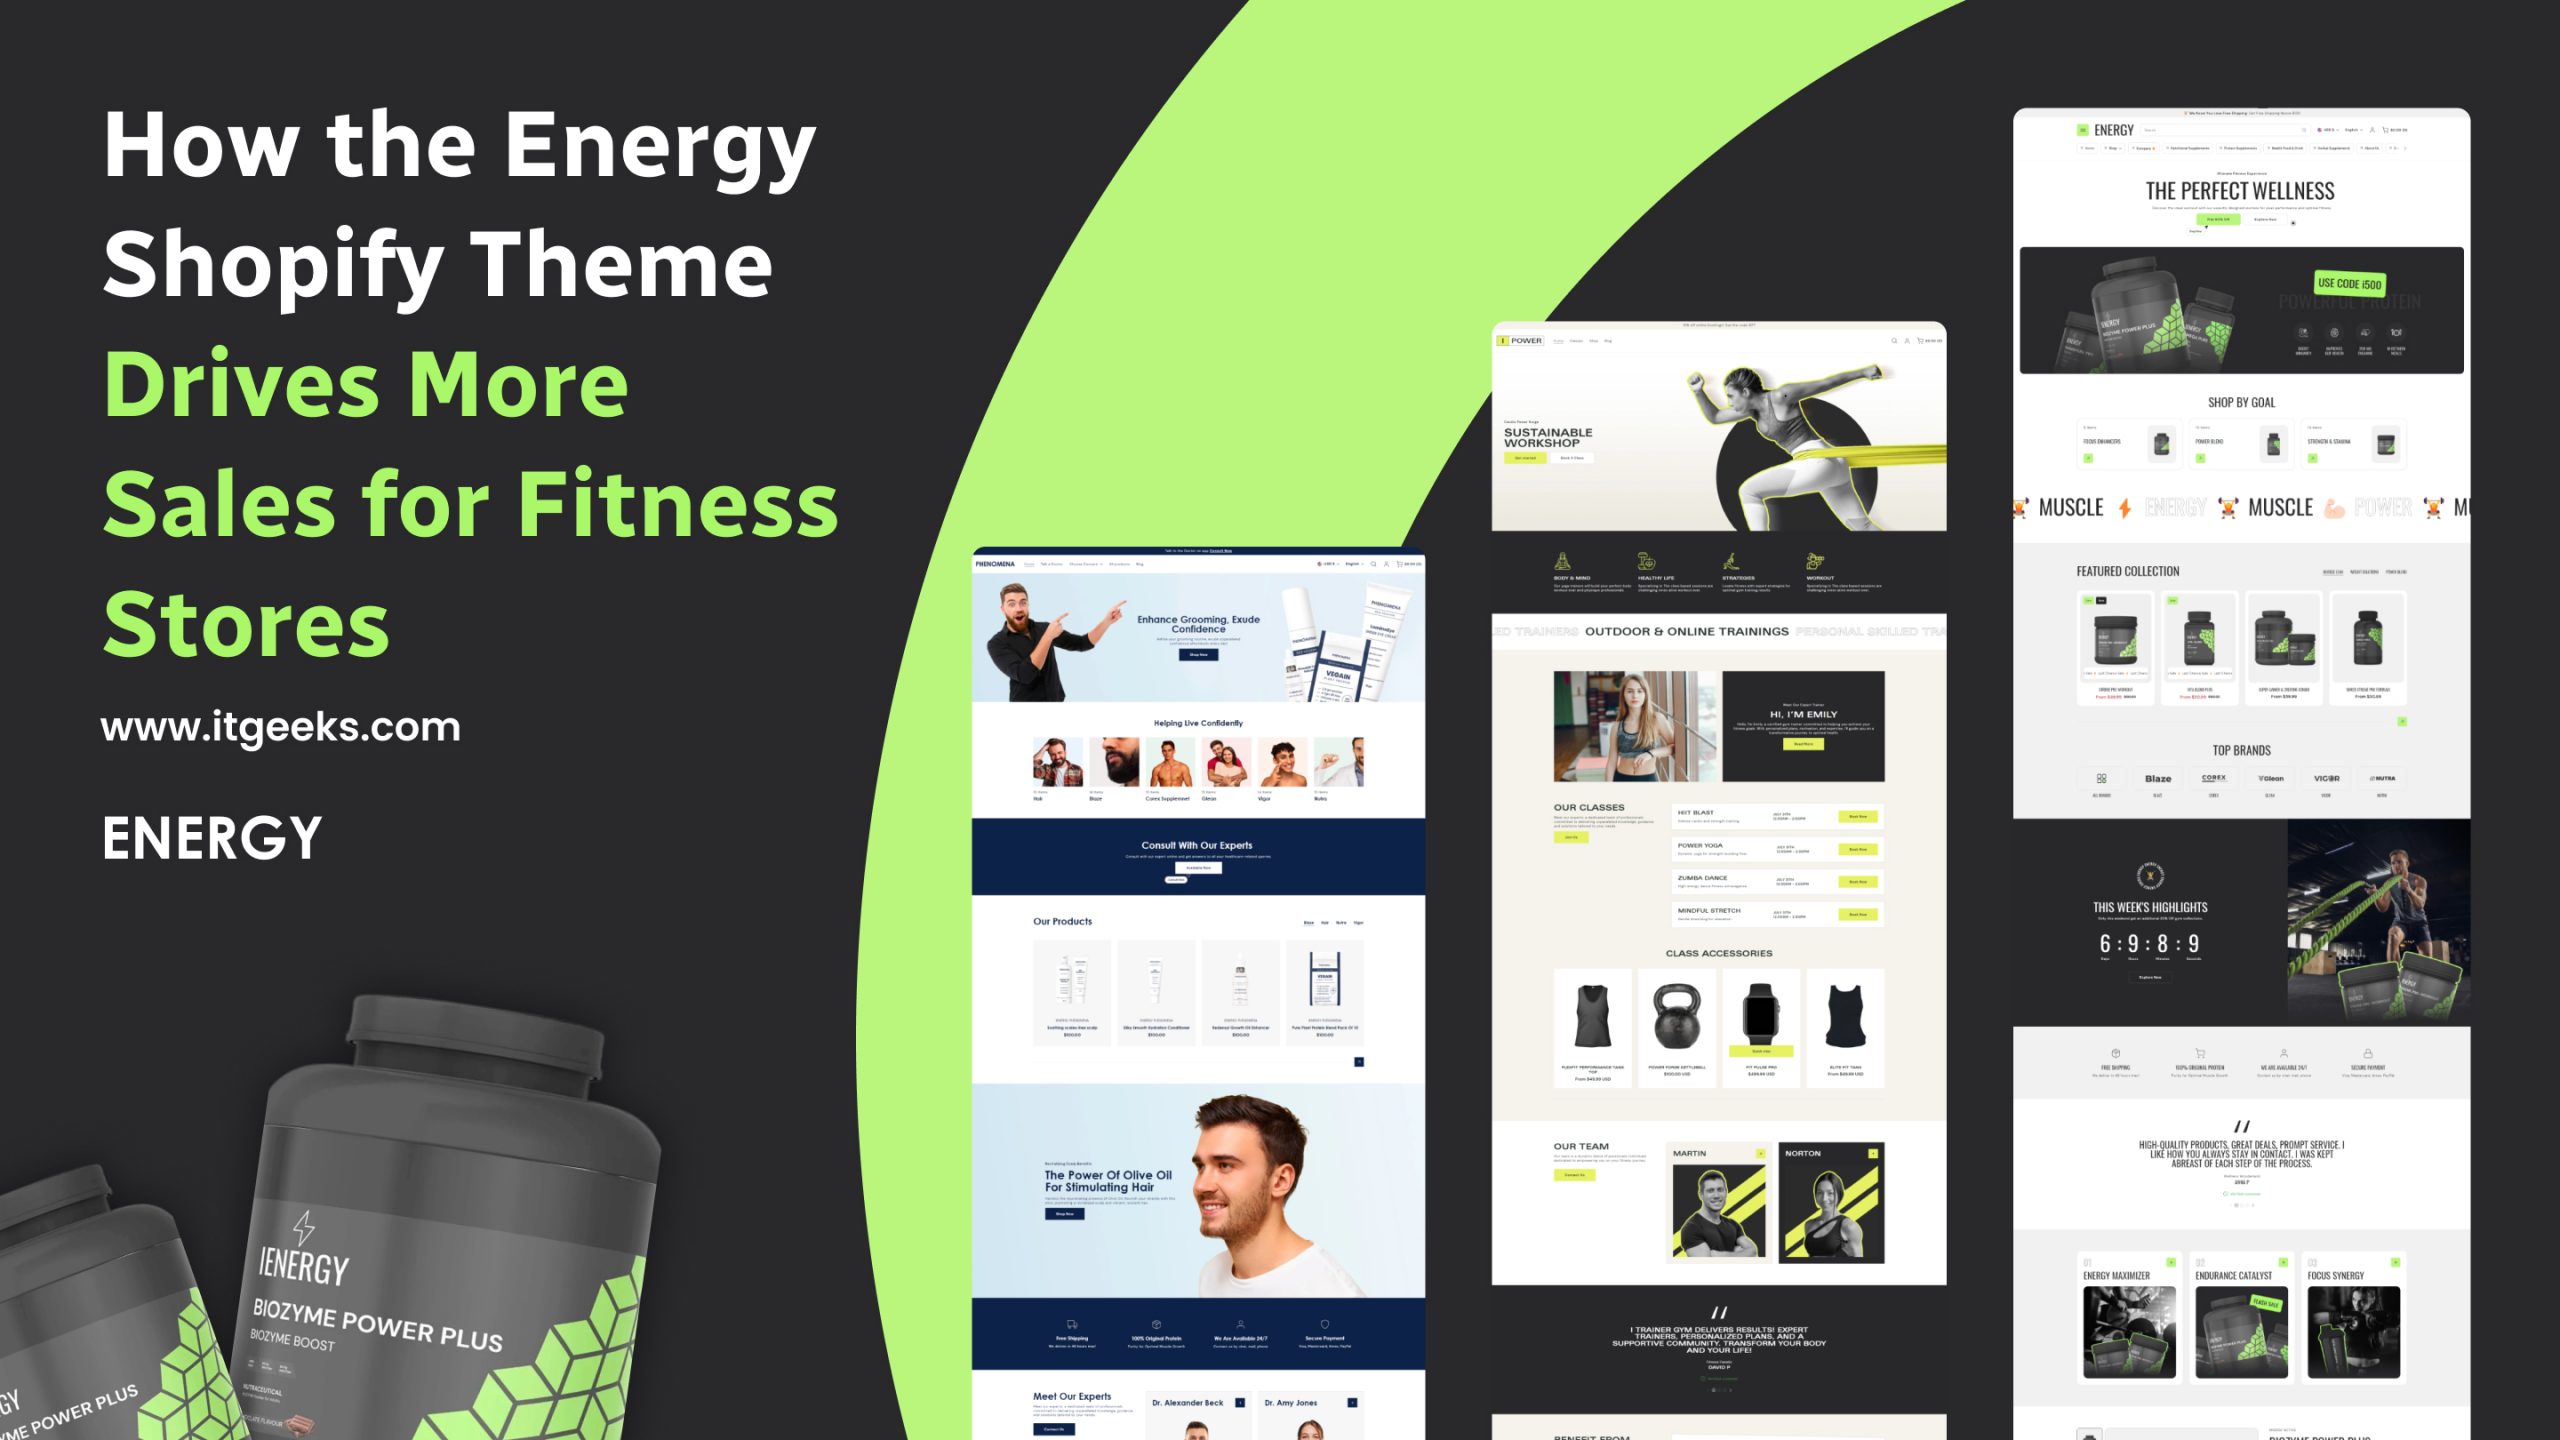 How the Energy Shopify Theme Drives More Sales for Fitness Stores